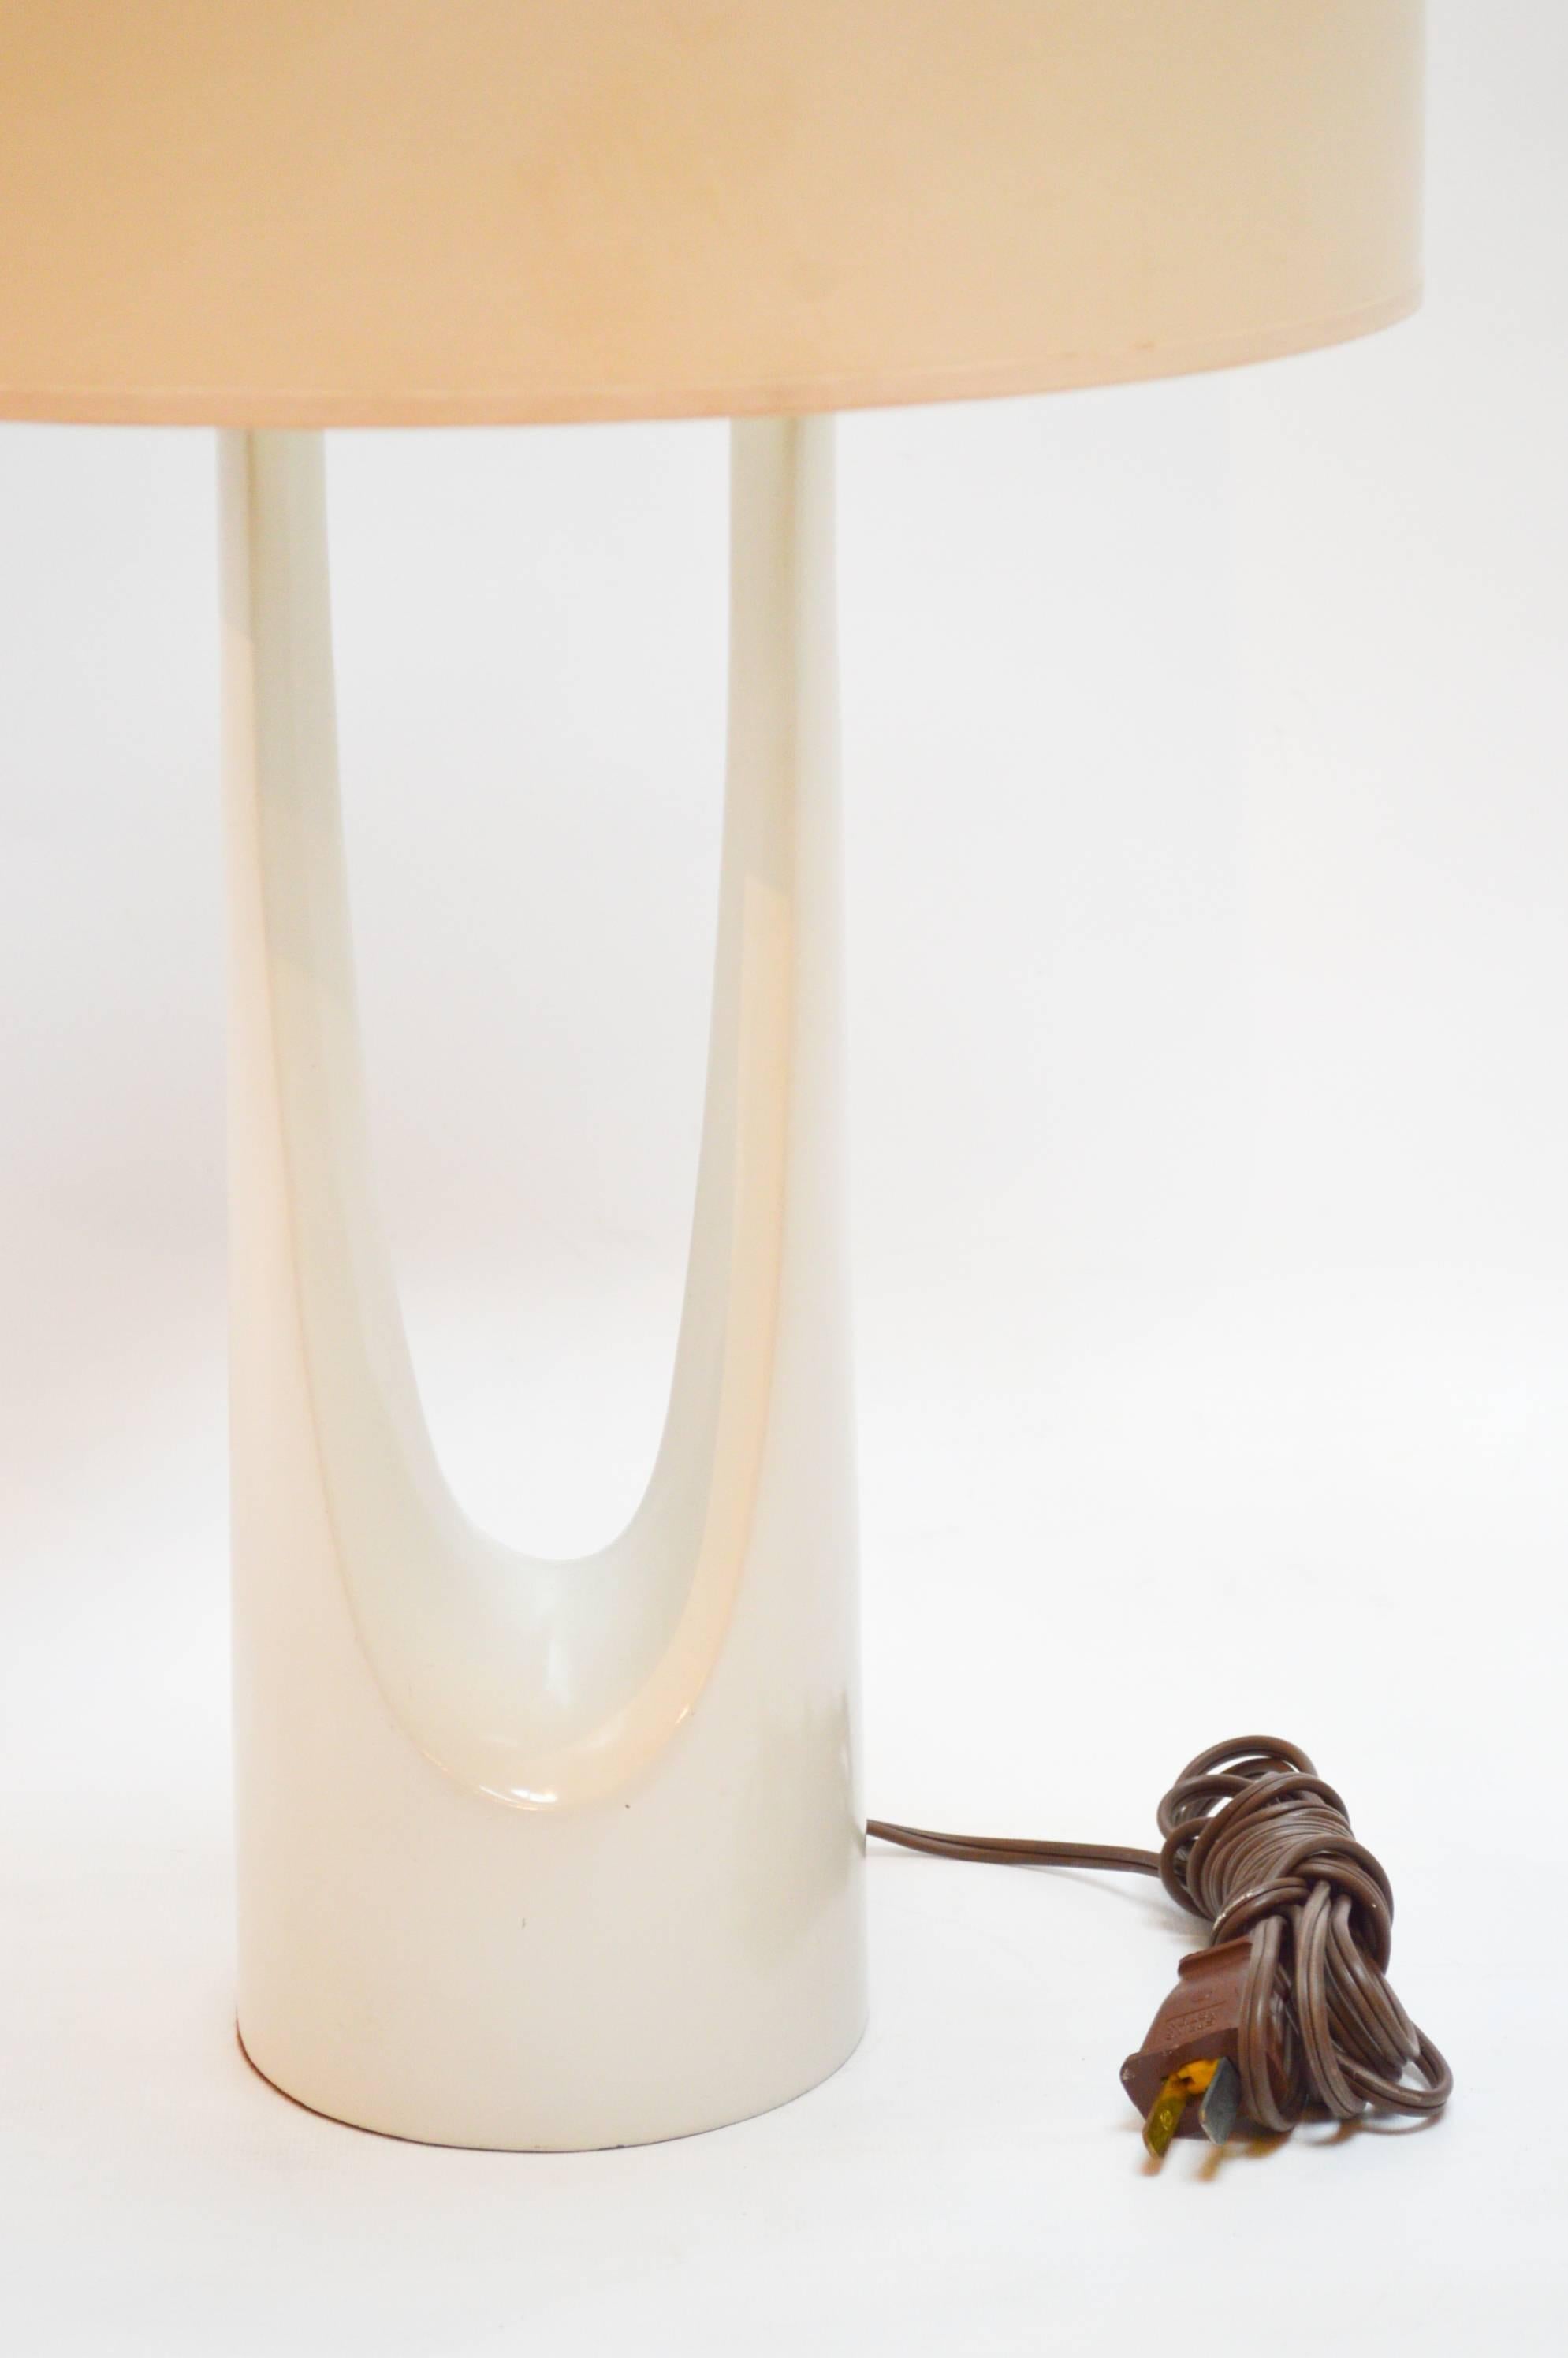 Mid-century modern sculptural metal table lamp with original shade by Laurel. The lamp measures 5